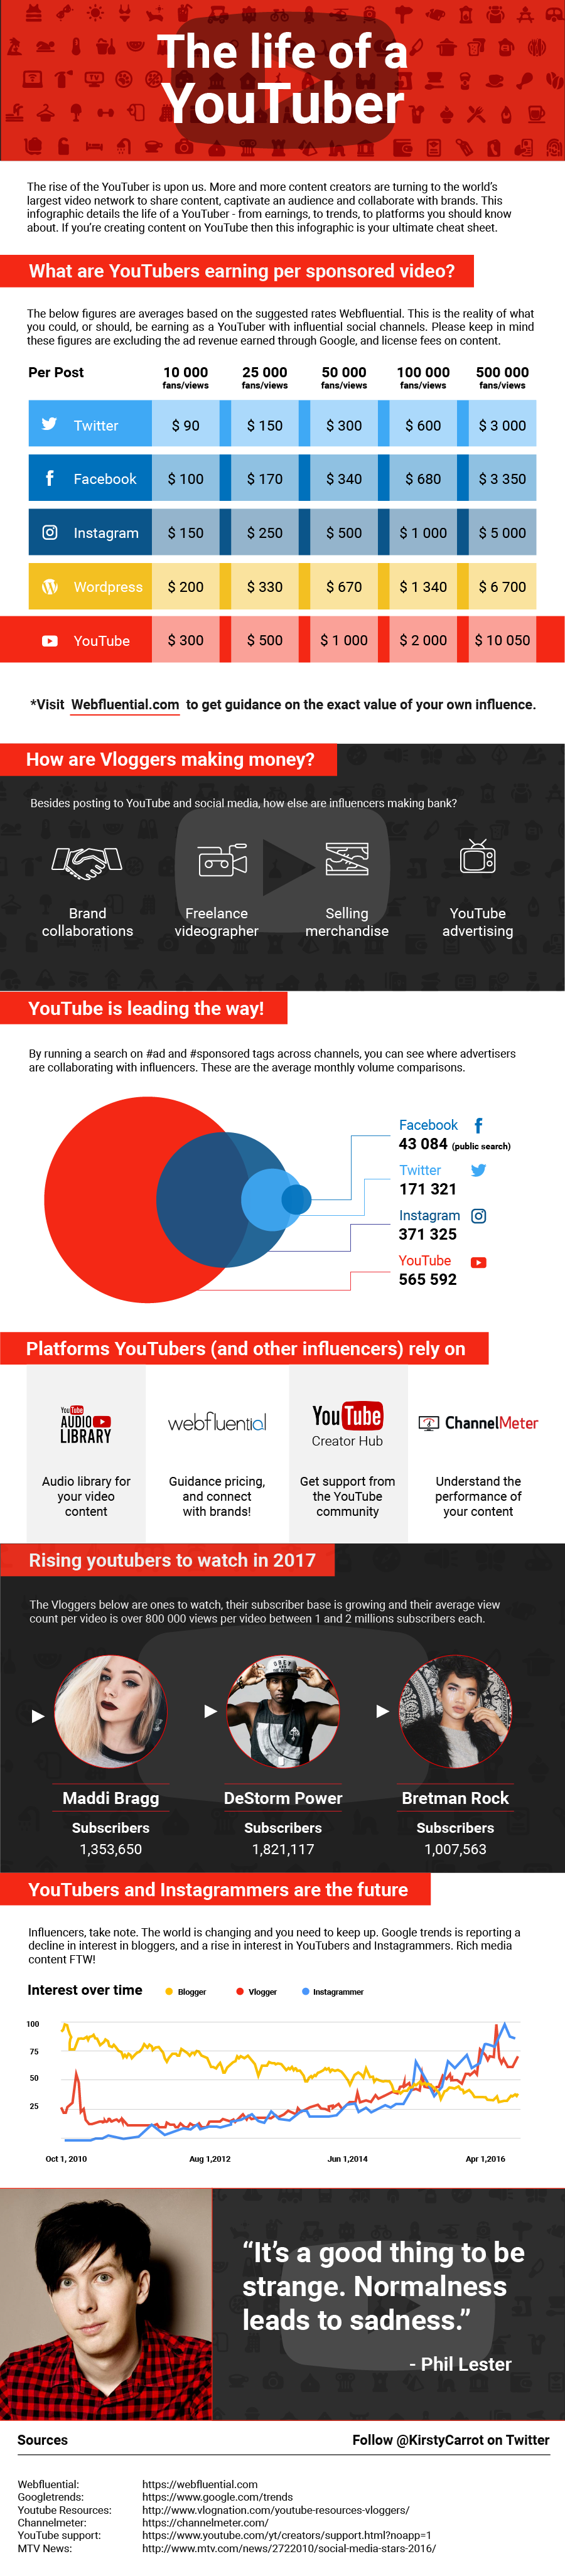 The Life Of A YouTuber - #Infographic